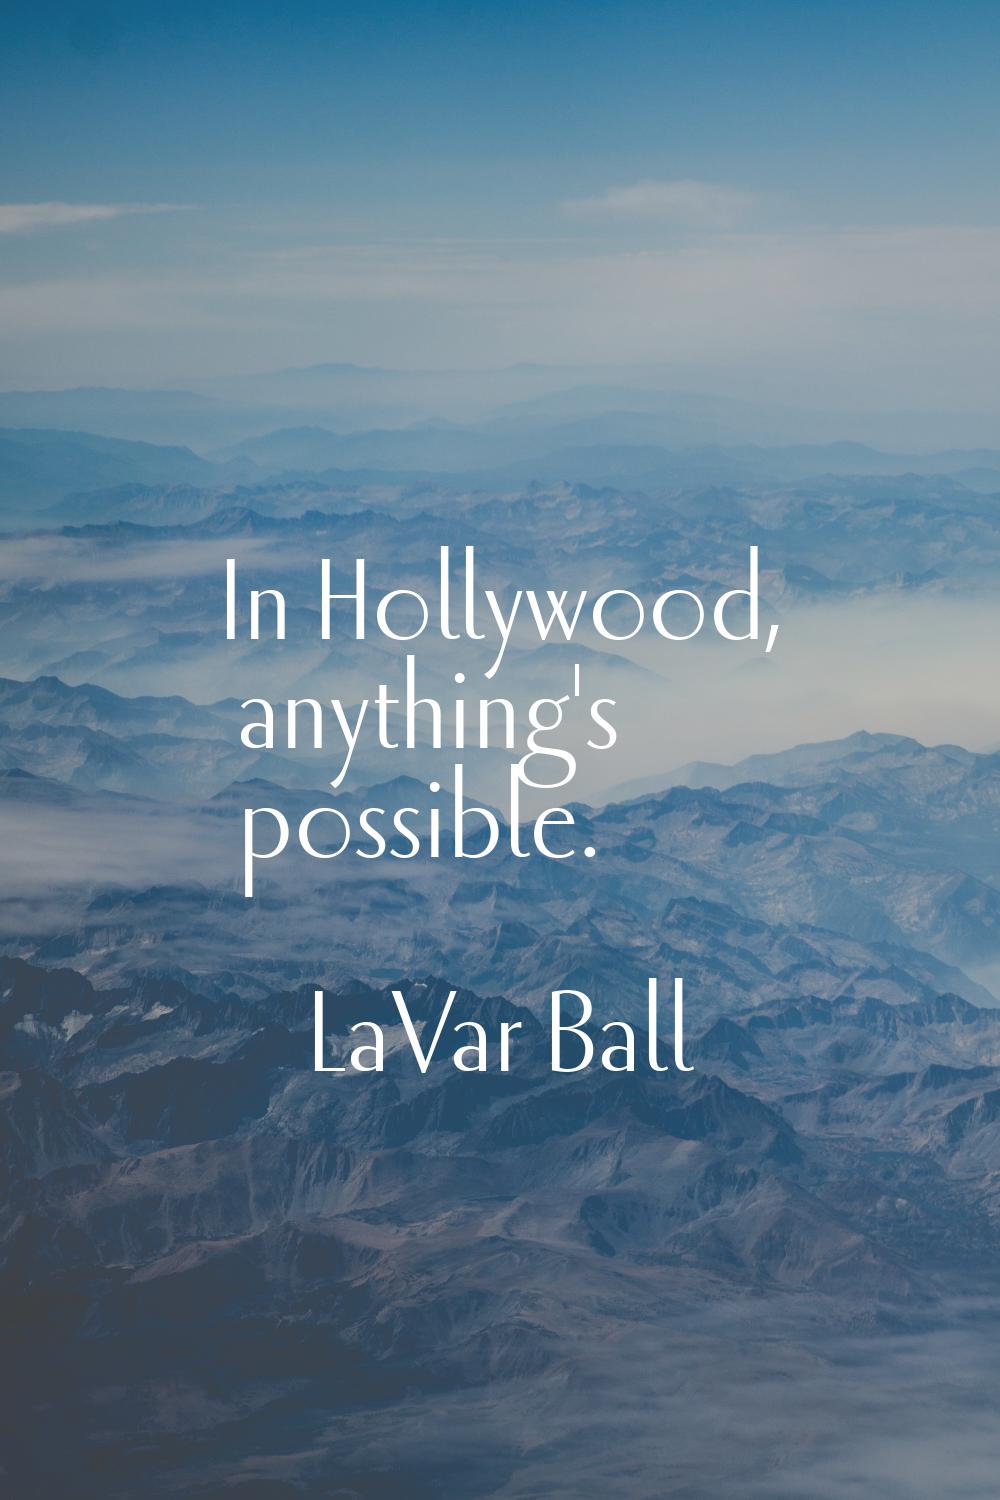 In Hollywood, anything's possible.